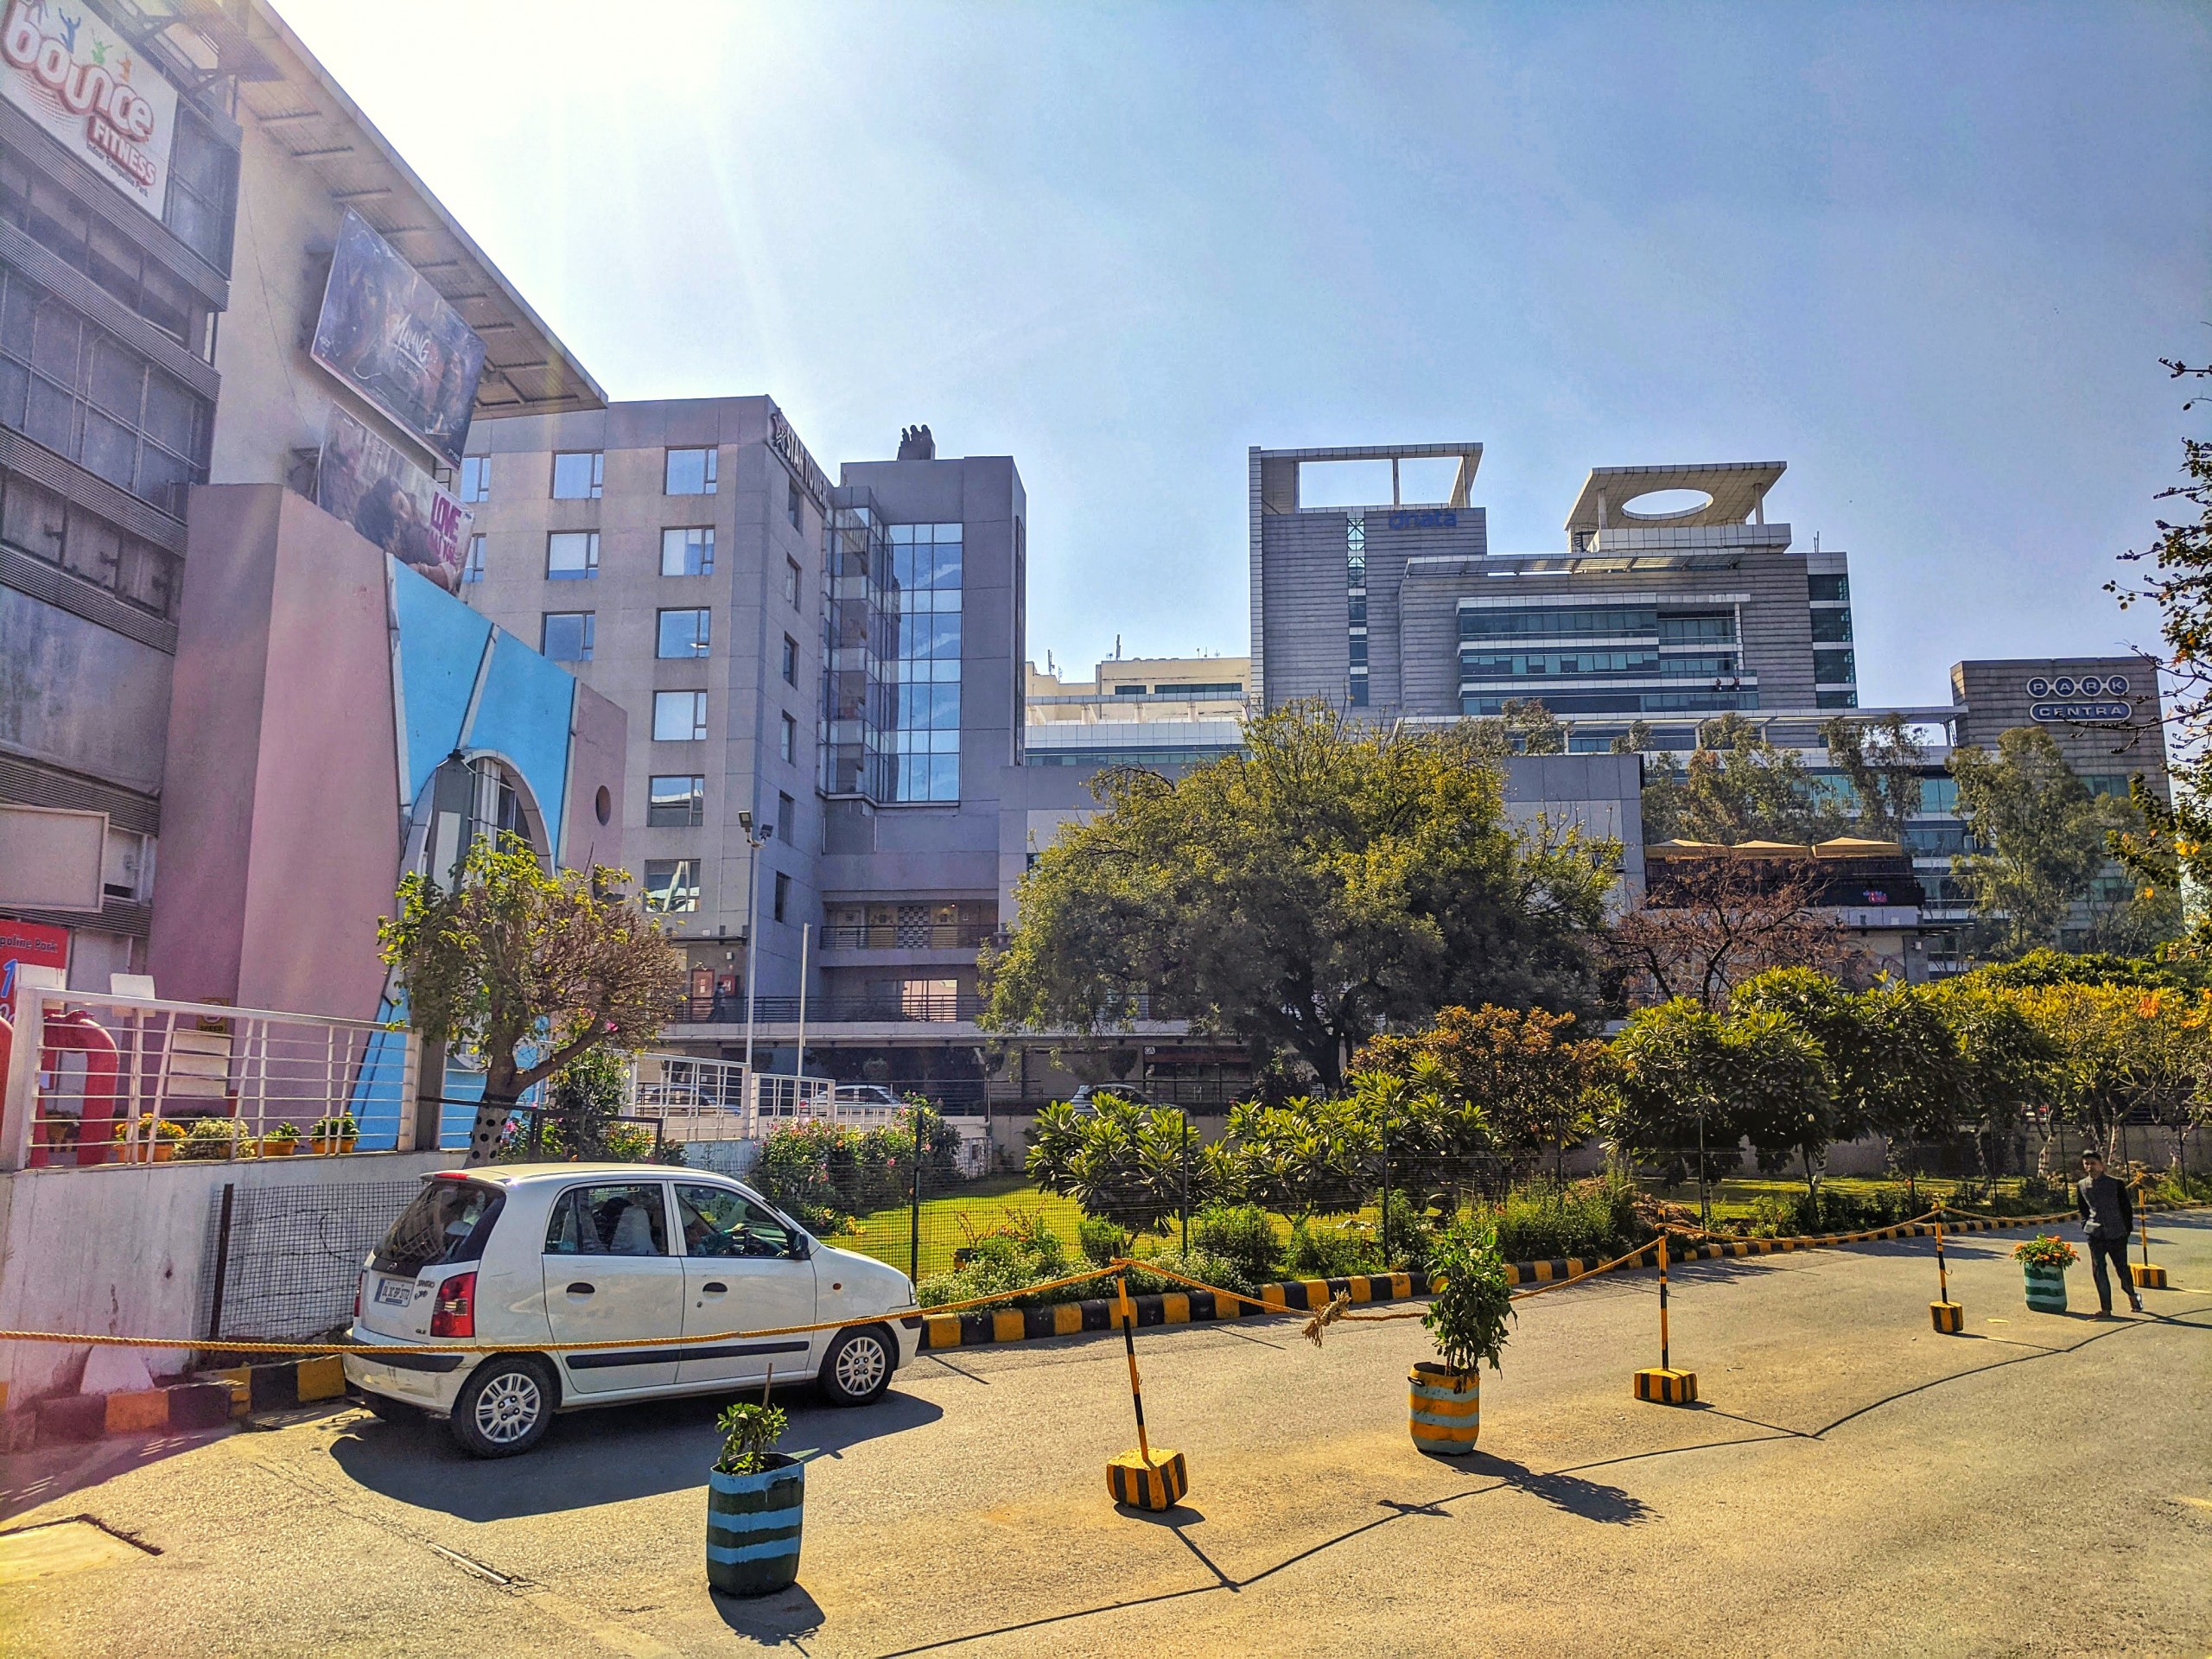 Indian City Mall